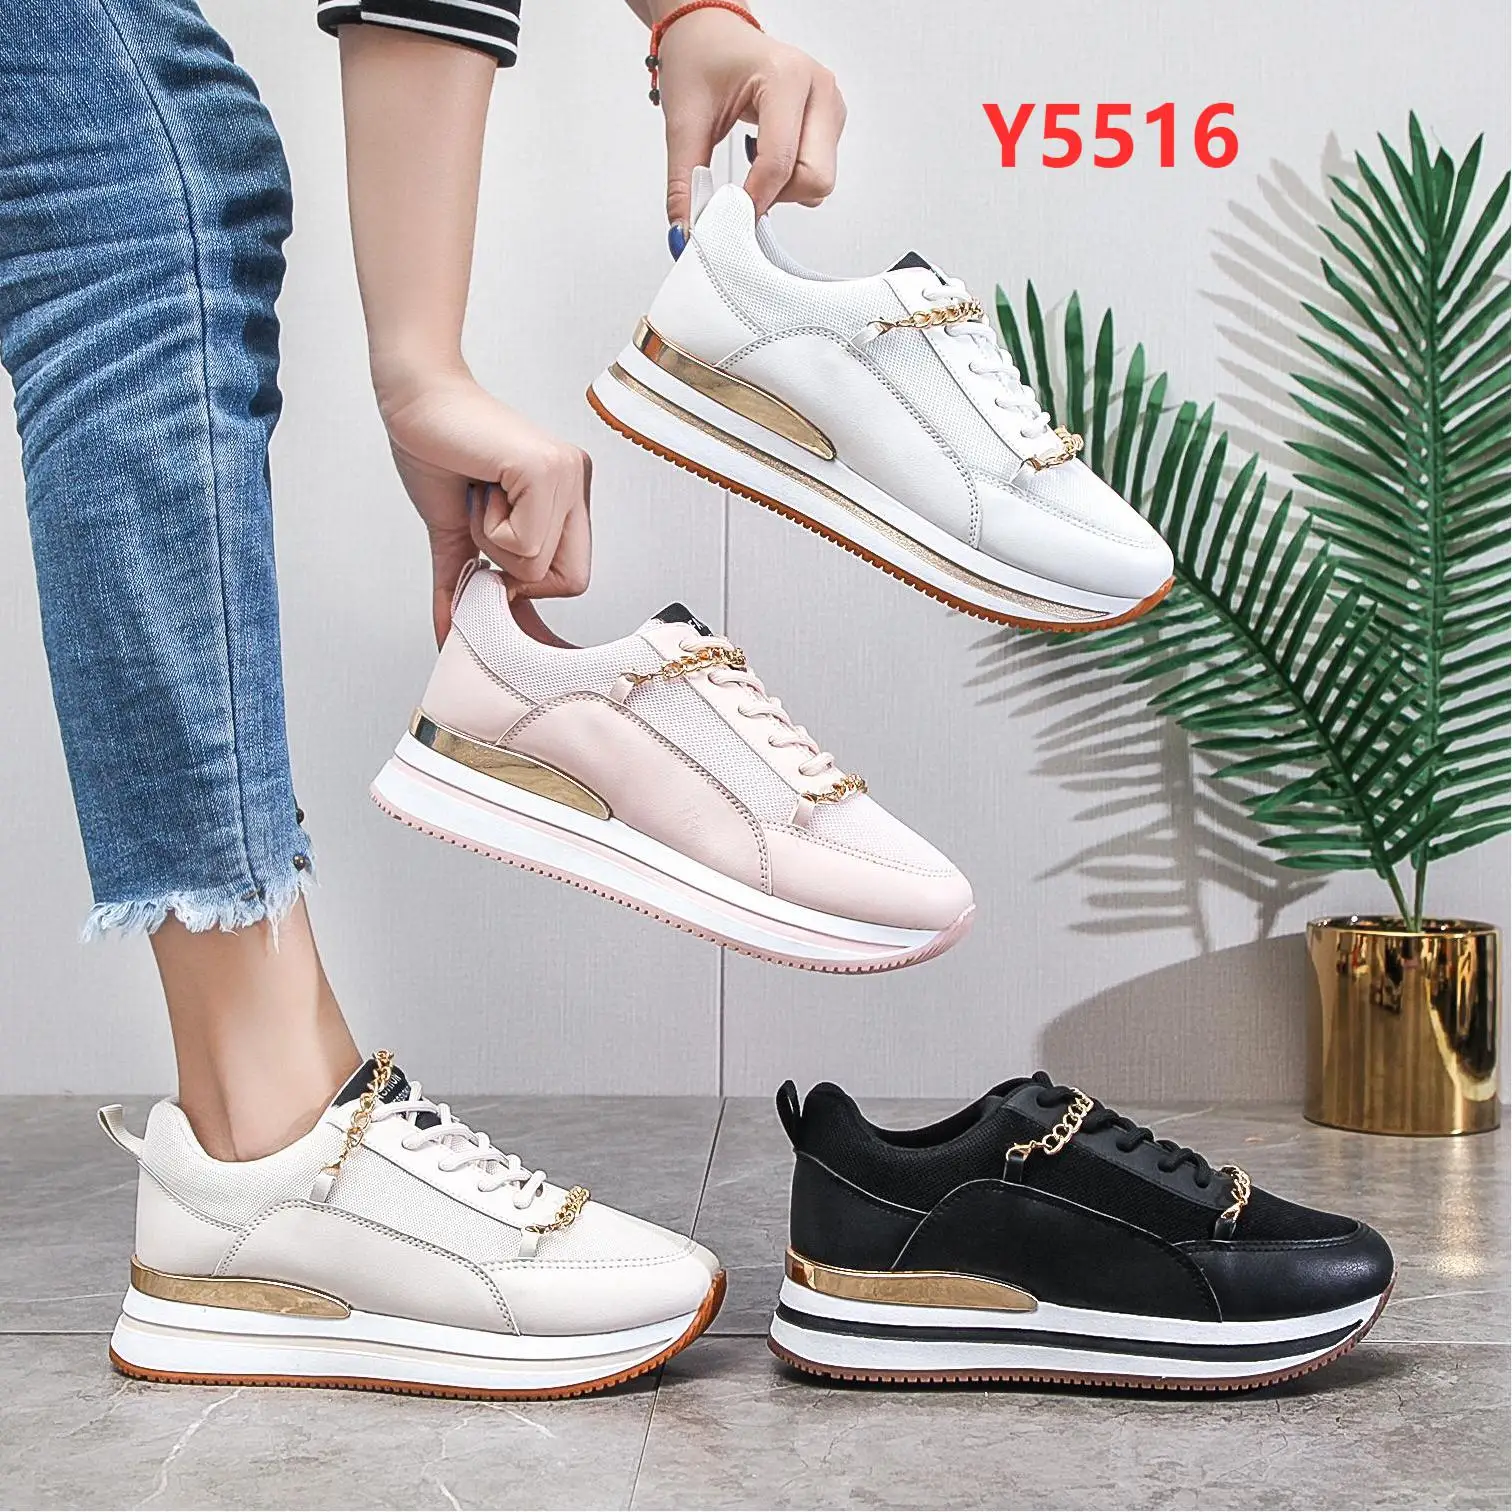 Fashion walking shoes Running Sneakers New Arrivals Girls Lace Up Suede Fashion Casual shoes